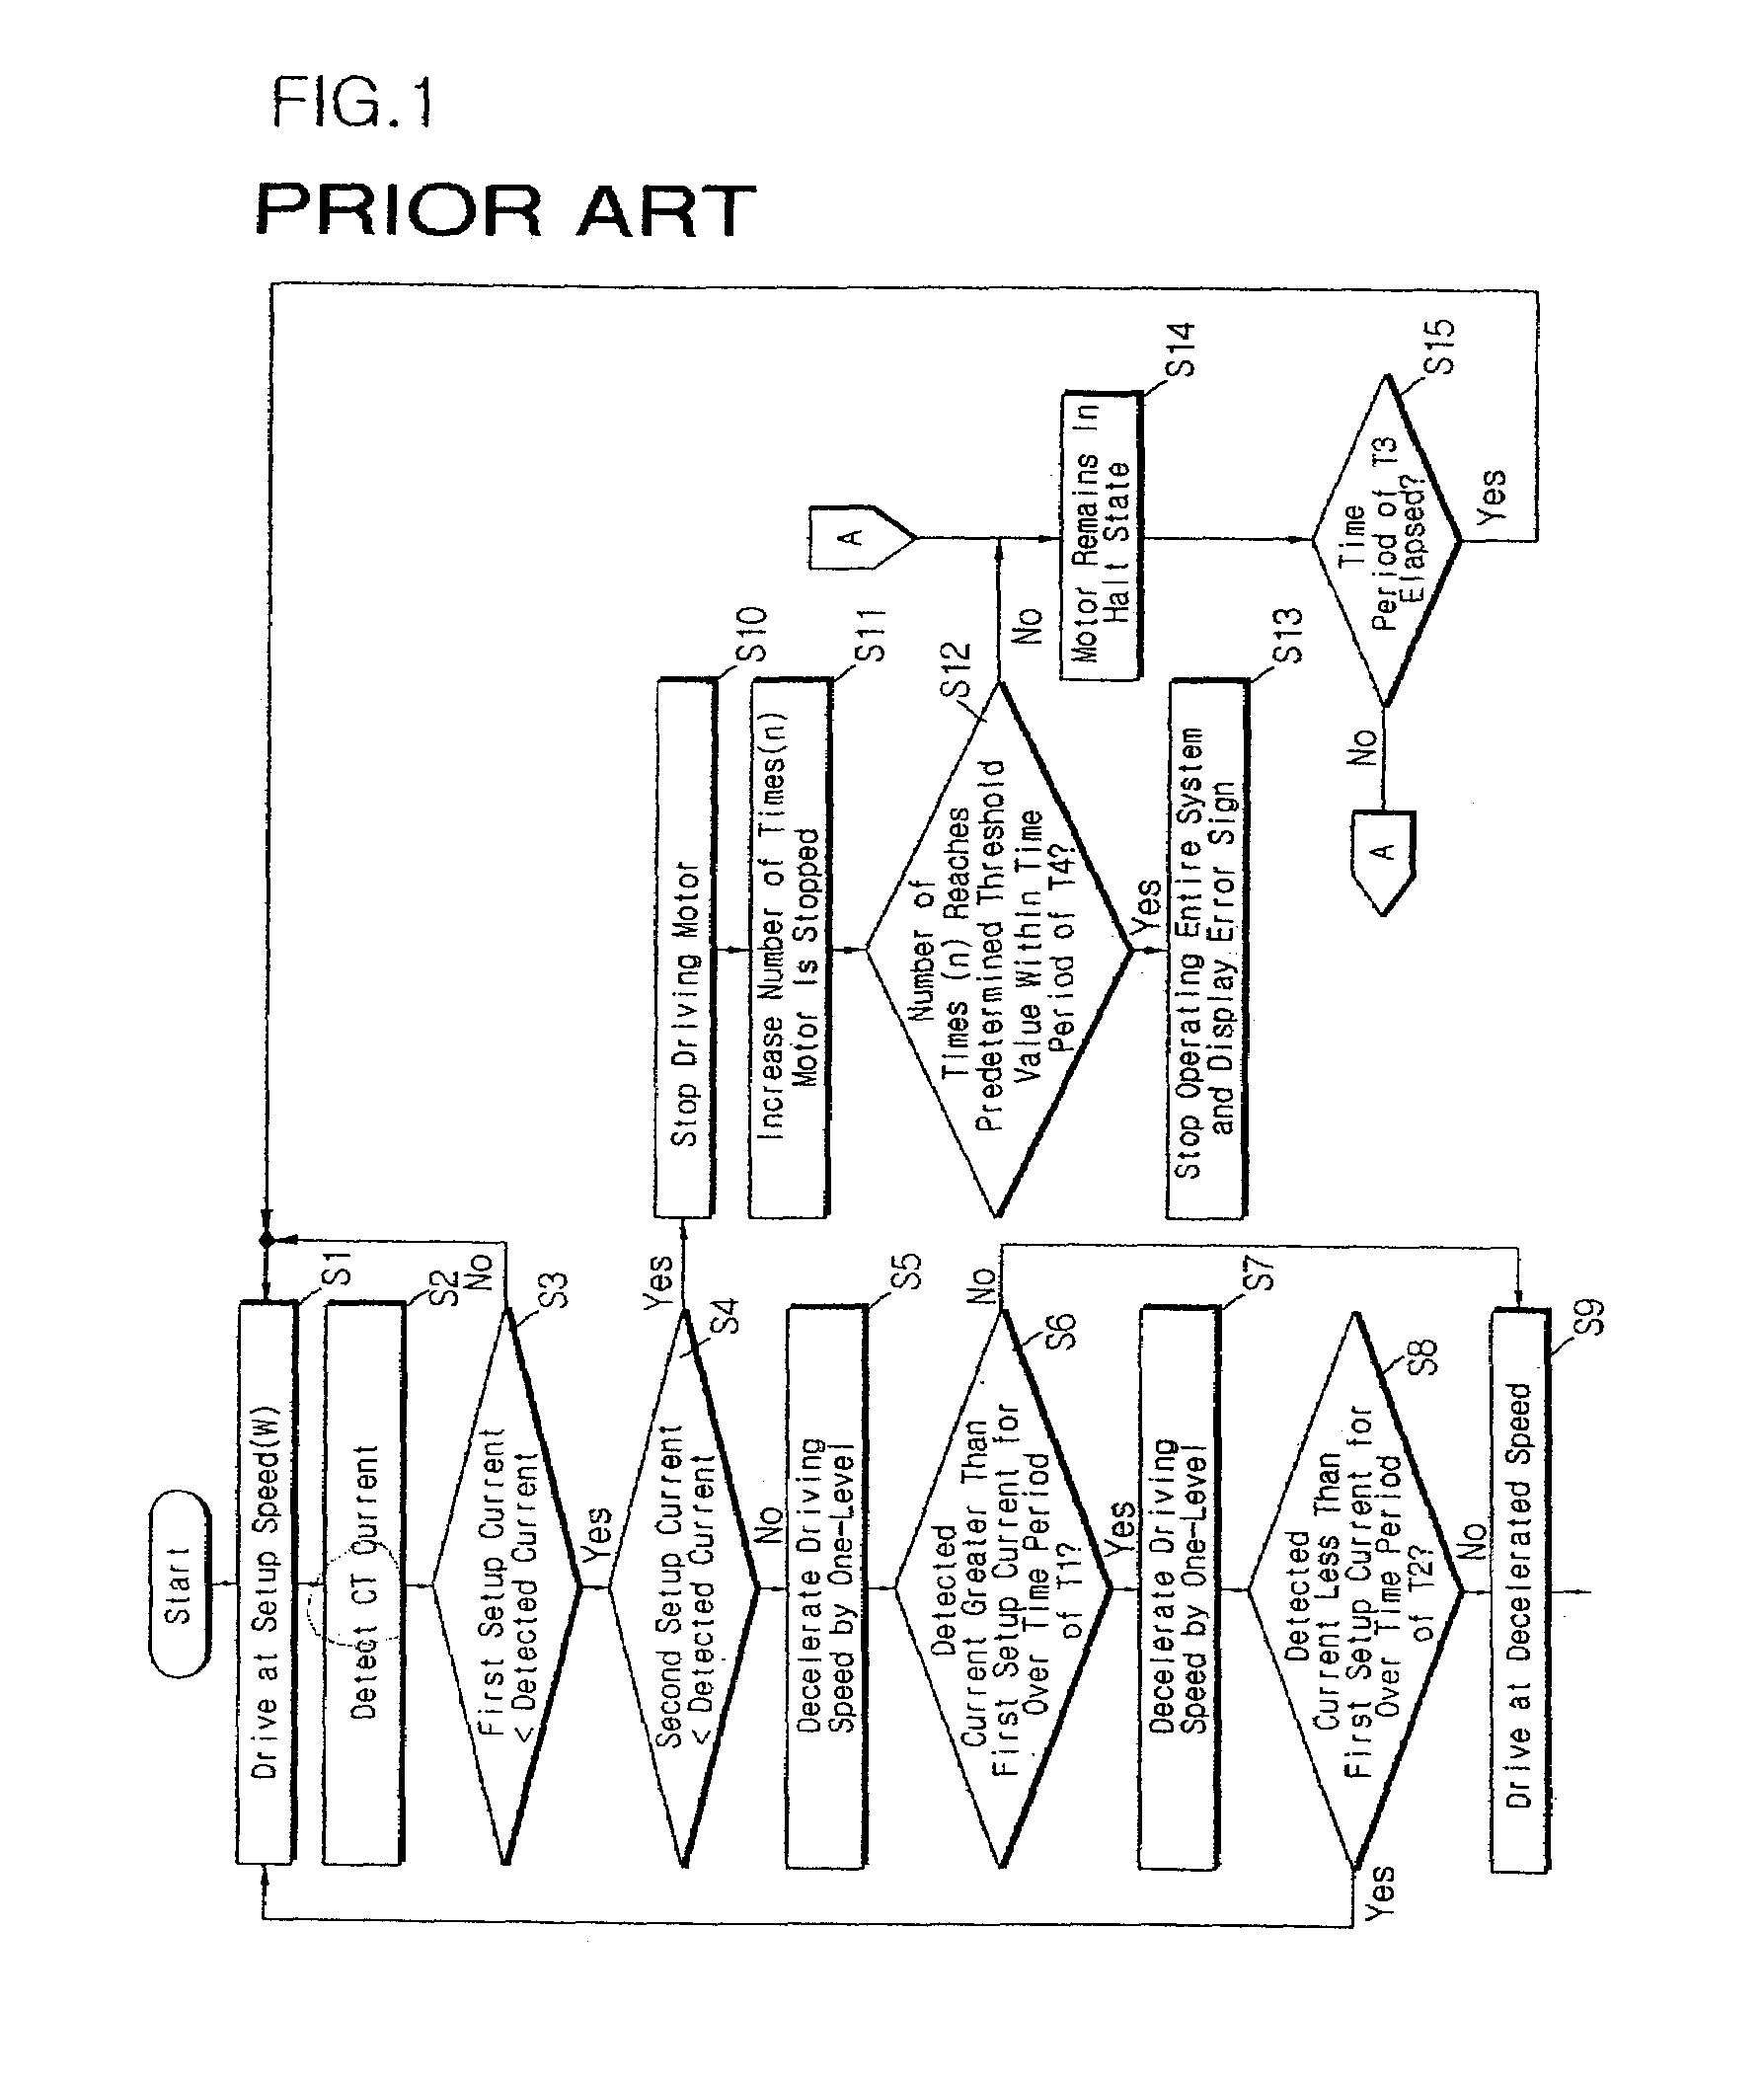 Method of controlling motor drive speed